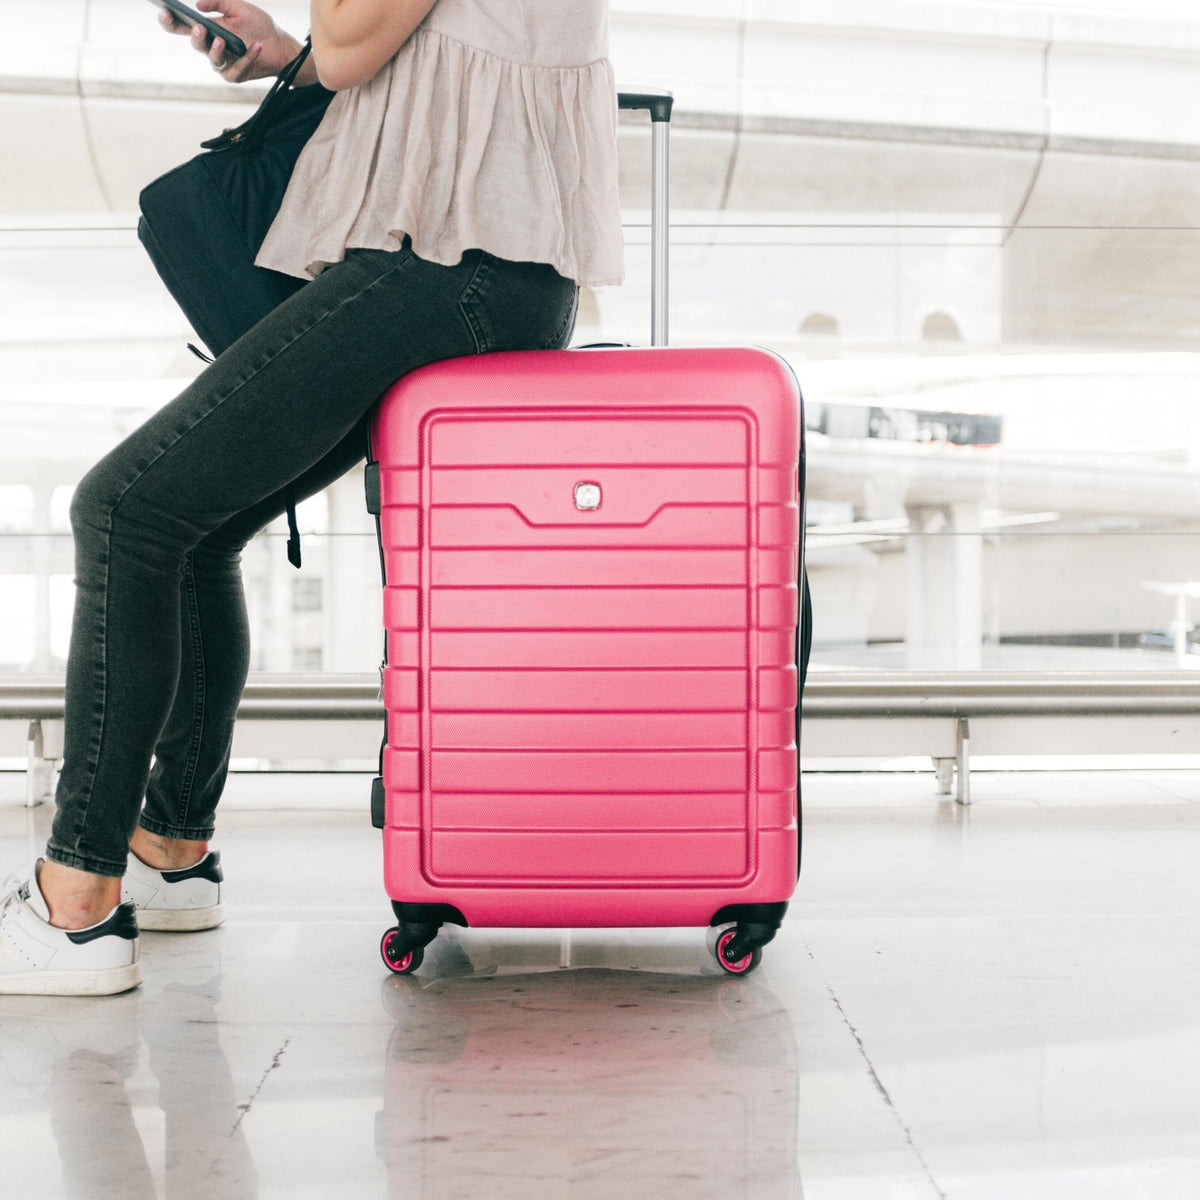 Carry-On and Checked Baggage Policy, Size & Fees | Allegiant®